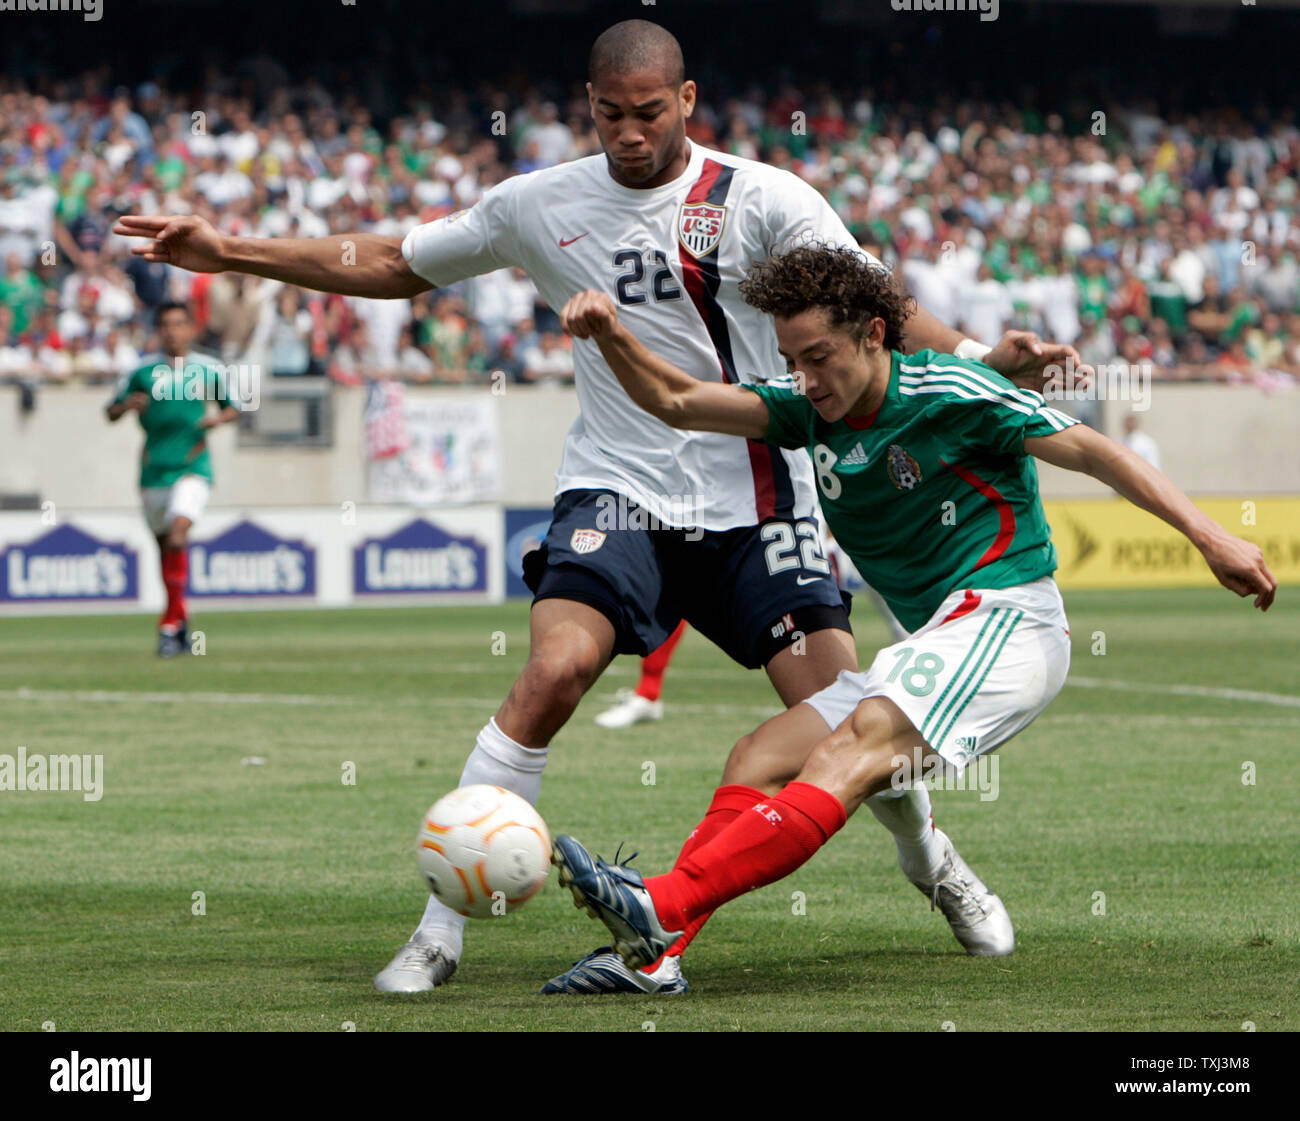 Mexico's Jose Andres Guardado (18) scores a goal in front of USA's Oguchi Onyewu (22) during the CONCACAF Gold Cup final match at Soldier Field in Chicago on June 24, 2007. (UPI Photo/Mark Cowan) Stock Photo